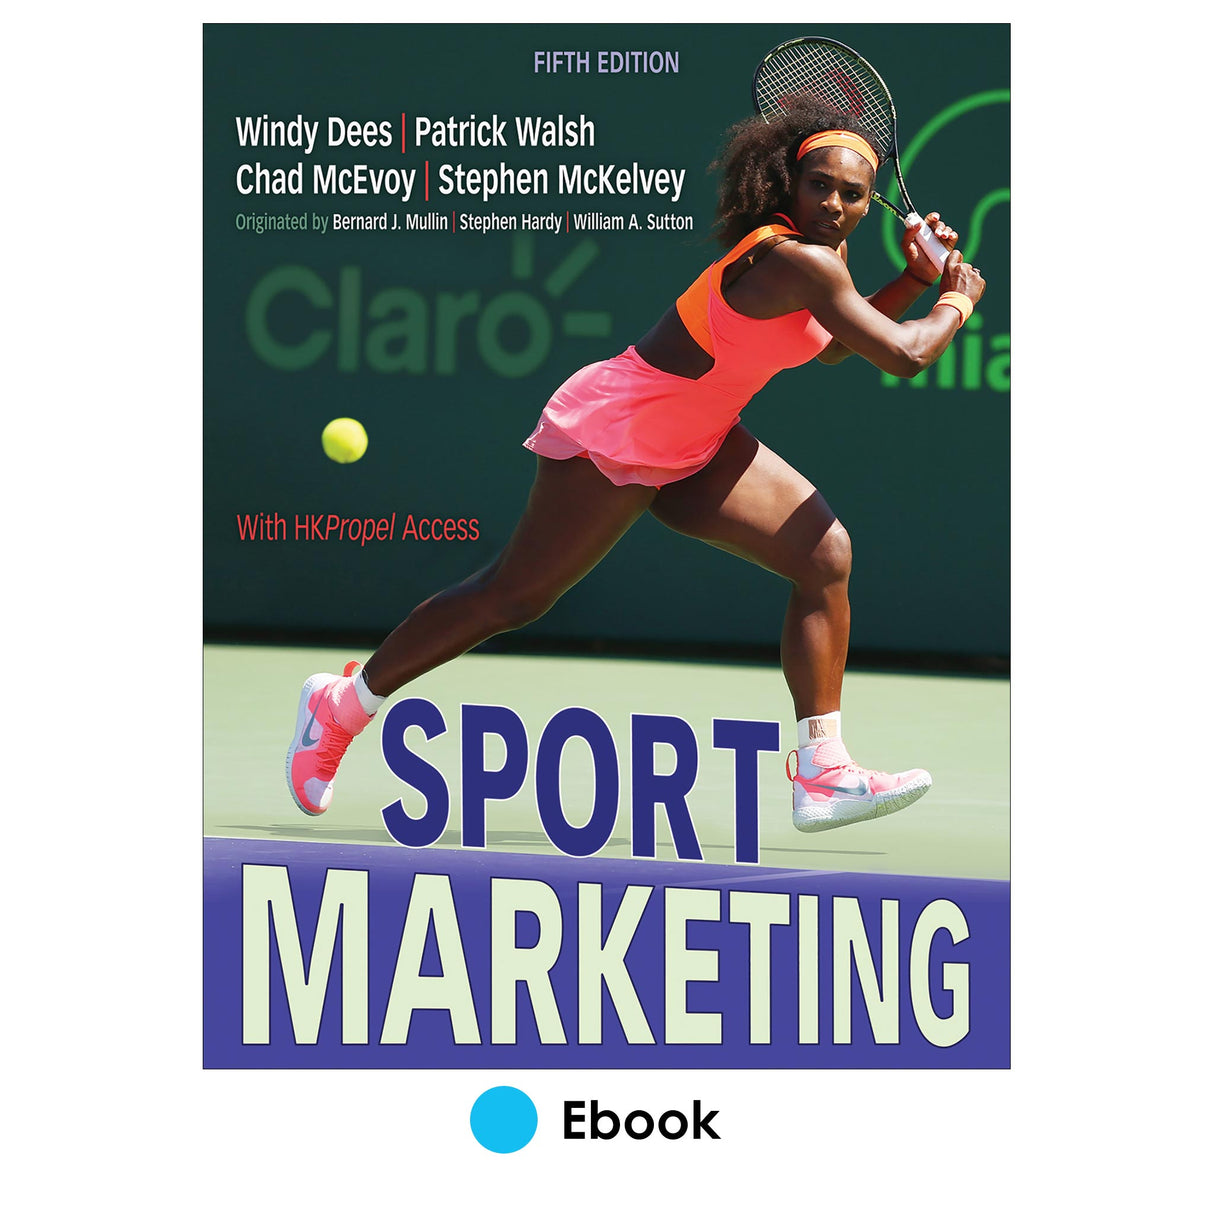 Sport Marketing 5th Edition Ebook With HKPropel Access